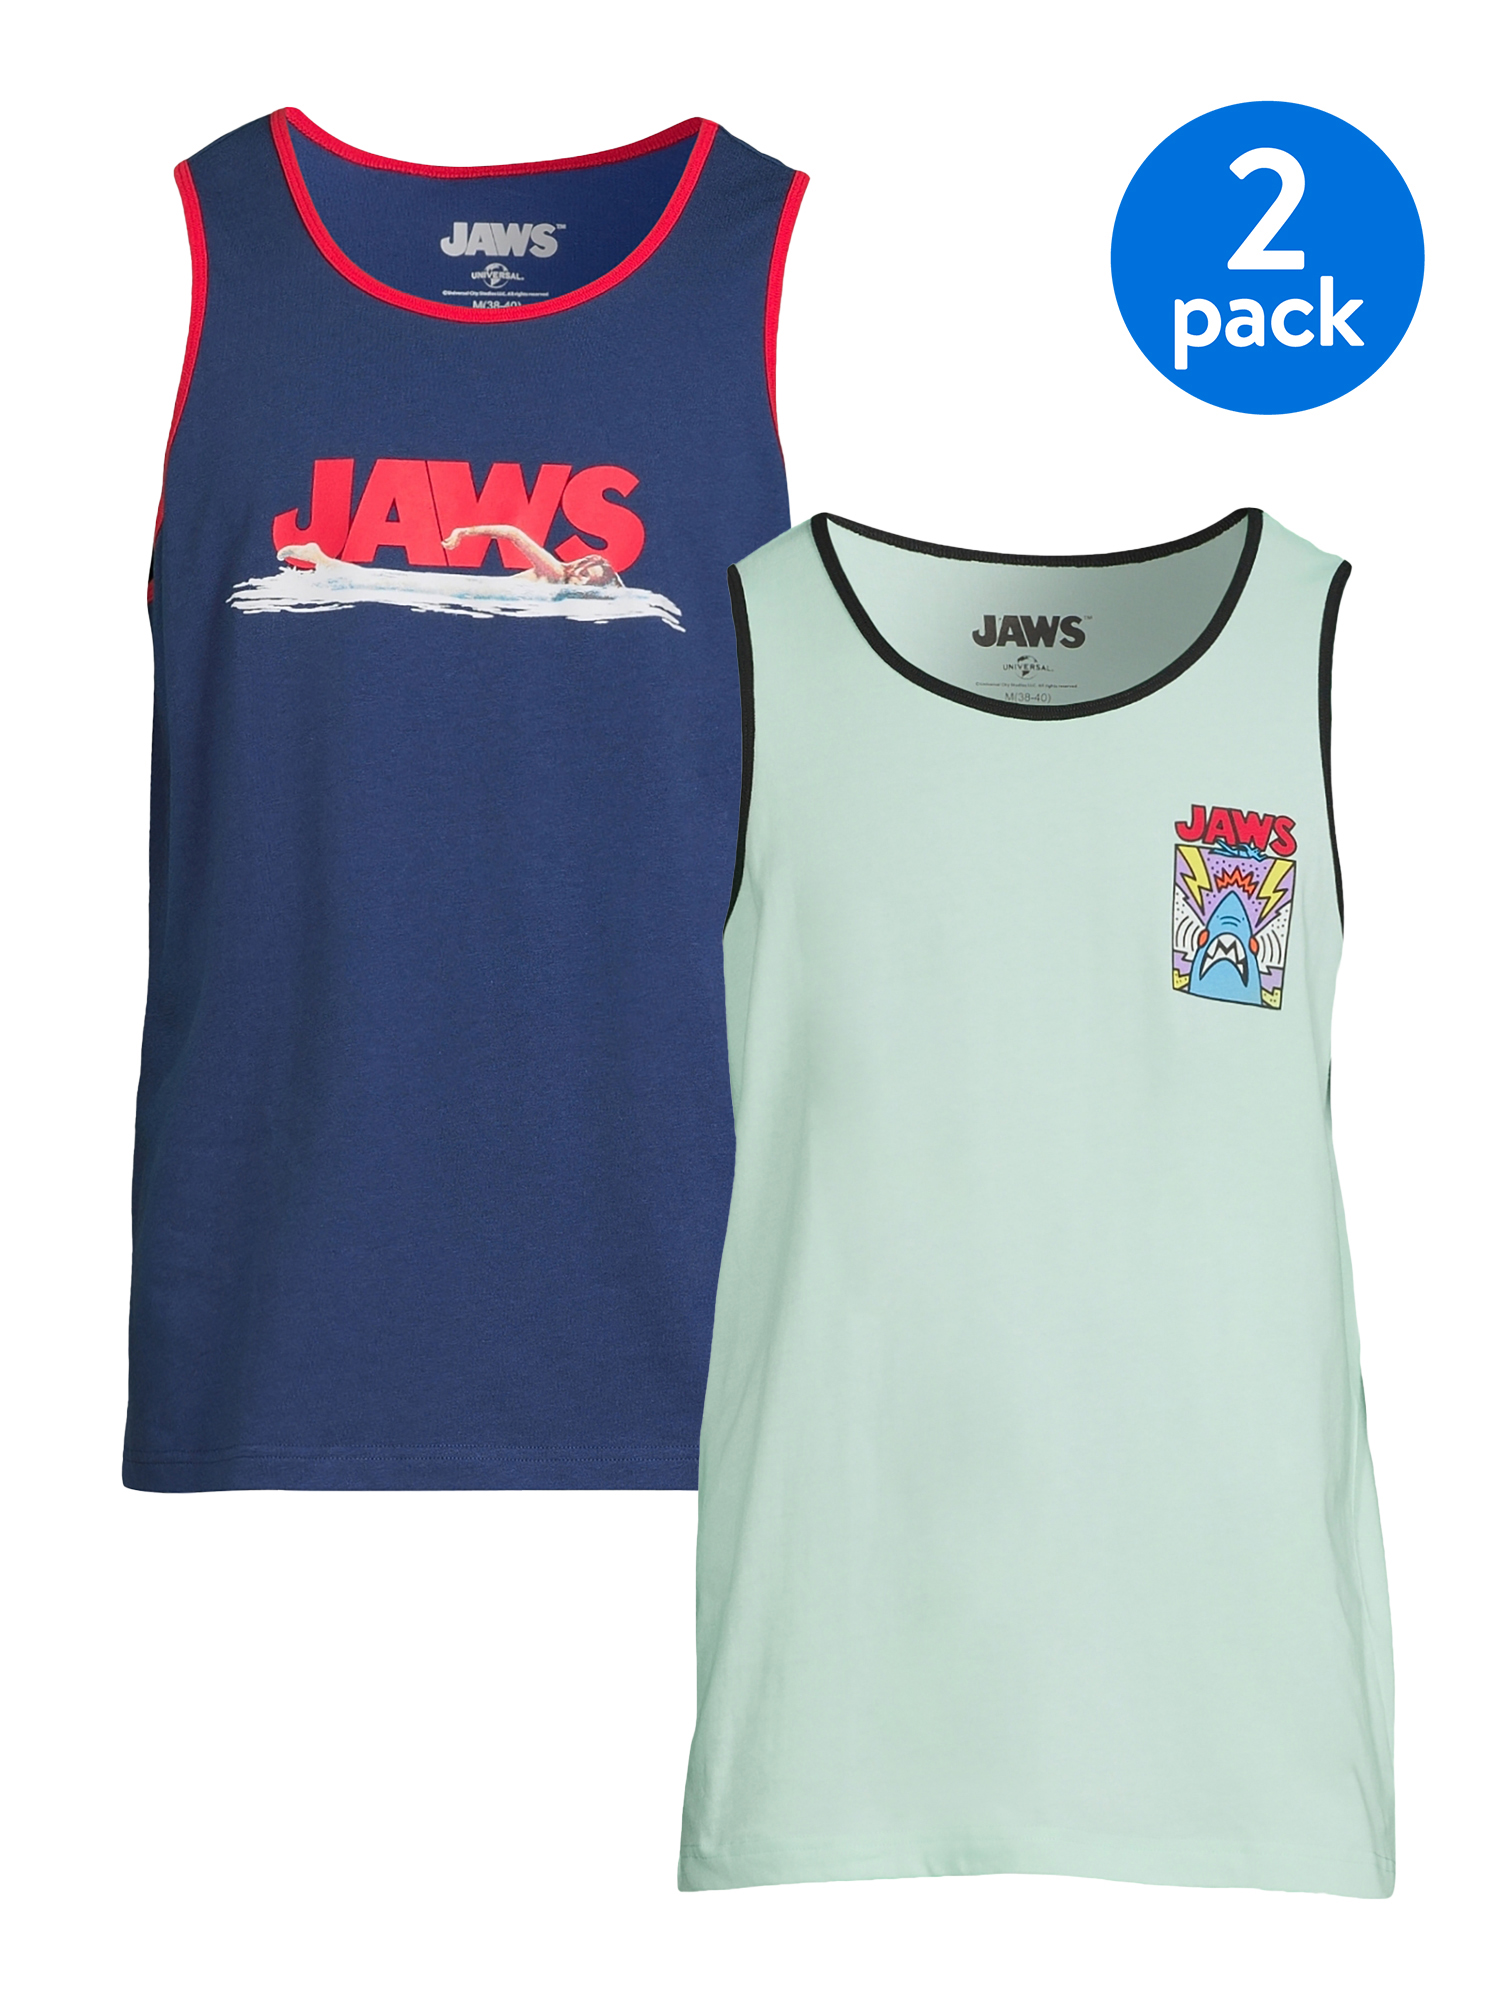 Universal by Jaws Sleeveless Graphic Print Tank Top (Men's or Men's Big & Tall) 2 Pack - image 1 of 9